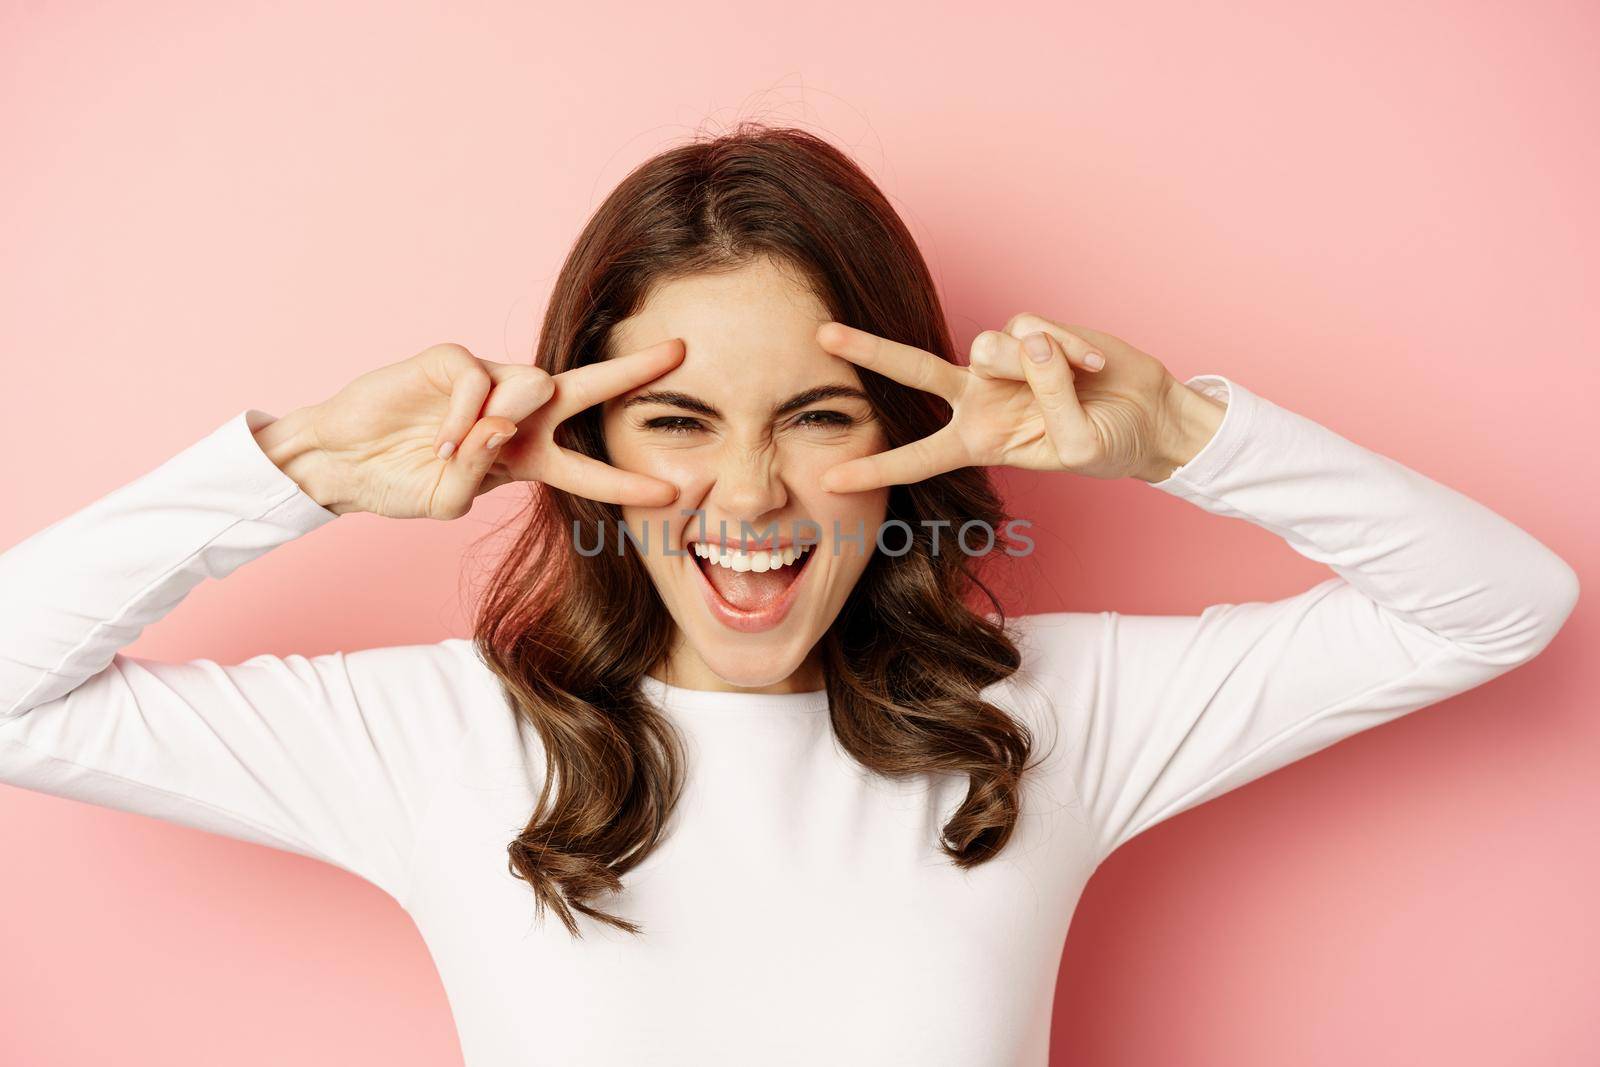 Close up face of young stylish girl, sassy woman showing happy, excited face expression, peace v-sign over eyes, standing against pink background.